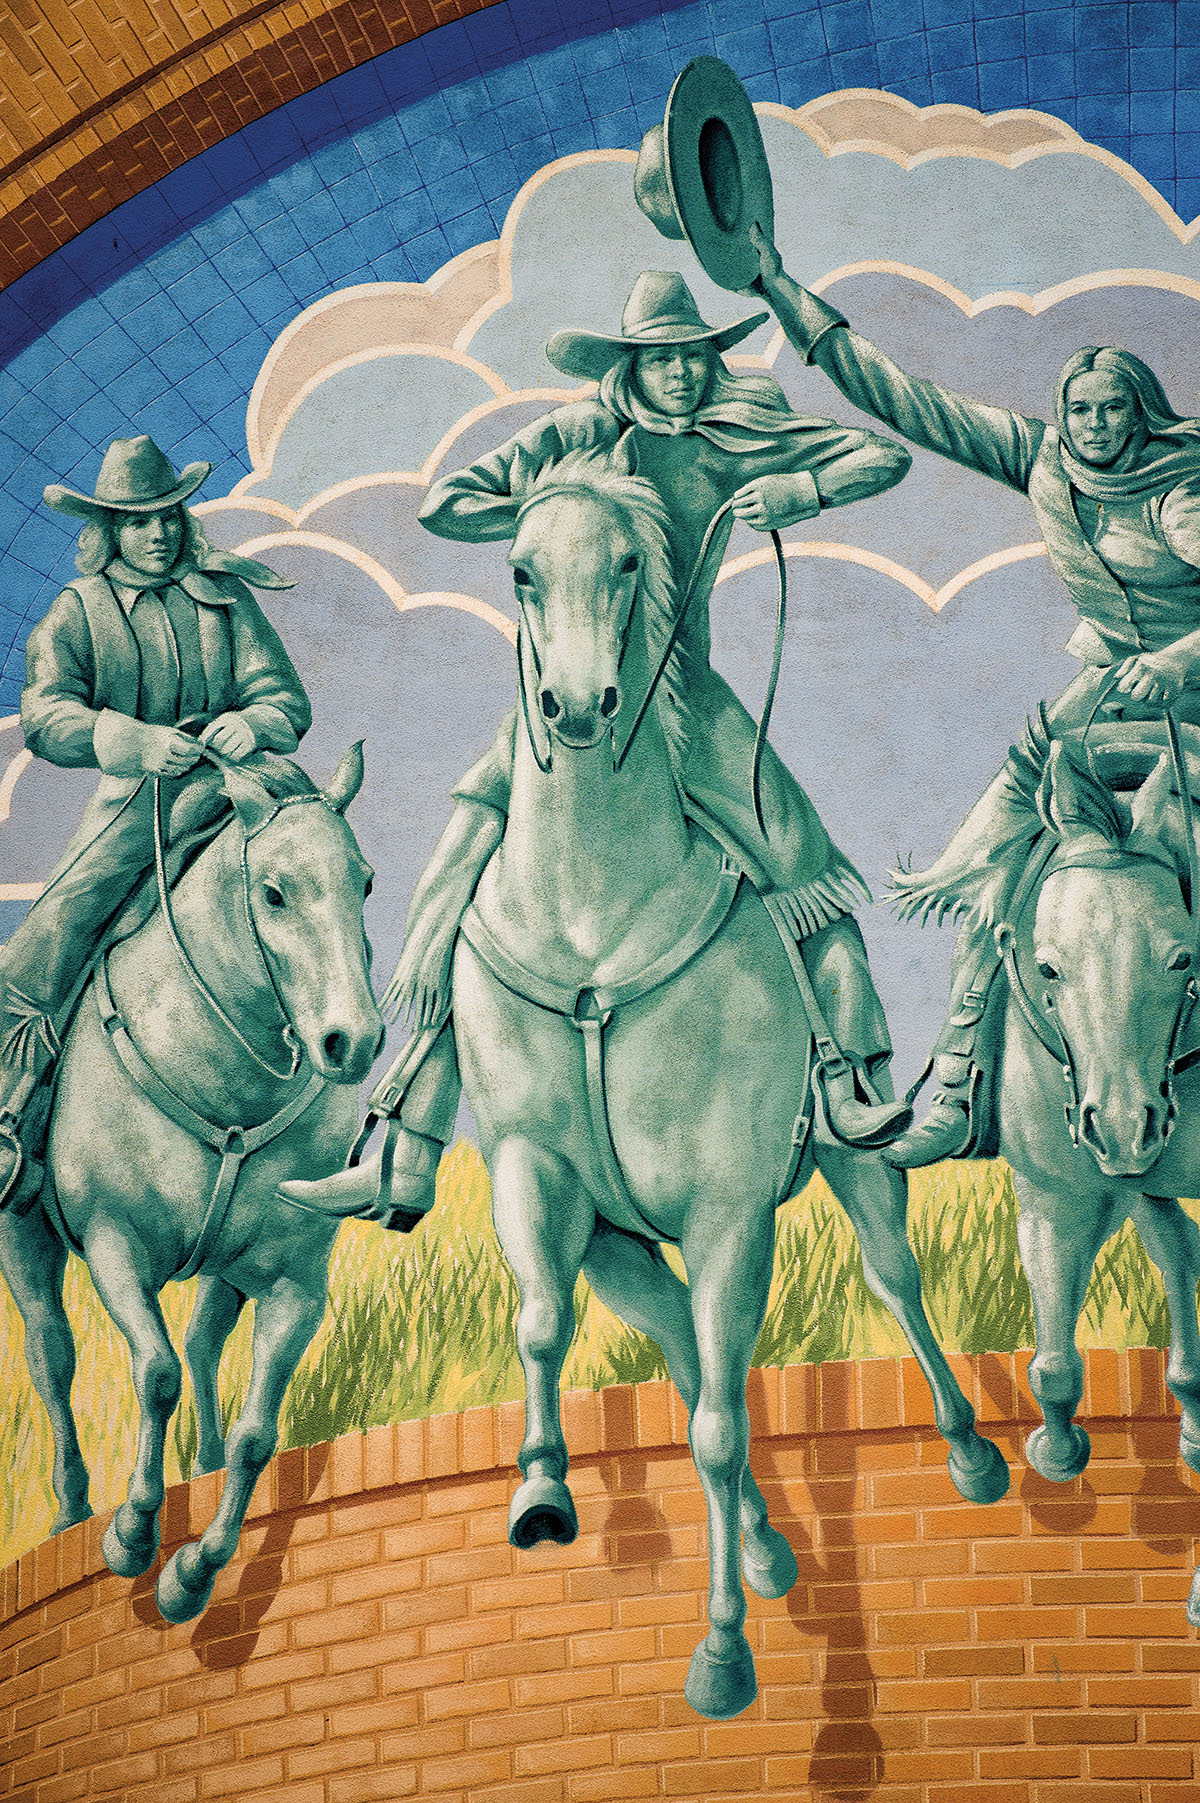 A mural of green-tinted cowgirls riding horses with blue clouds in the background